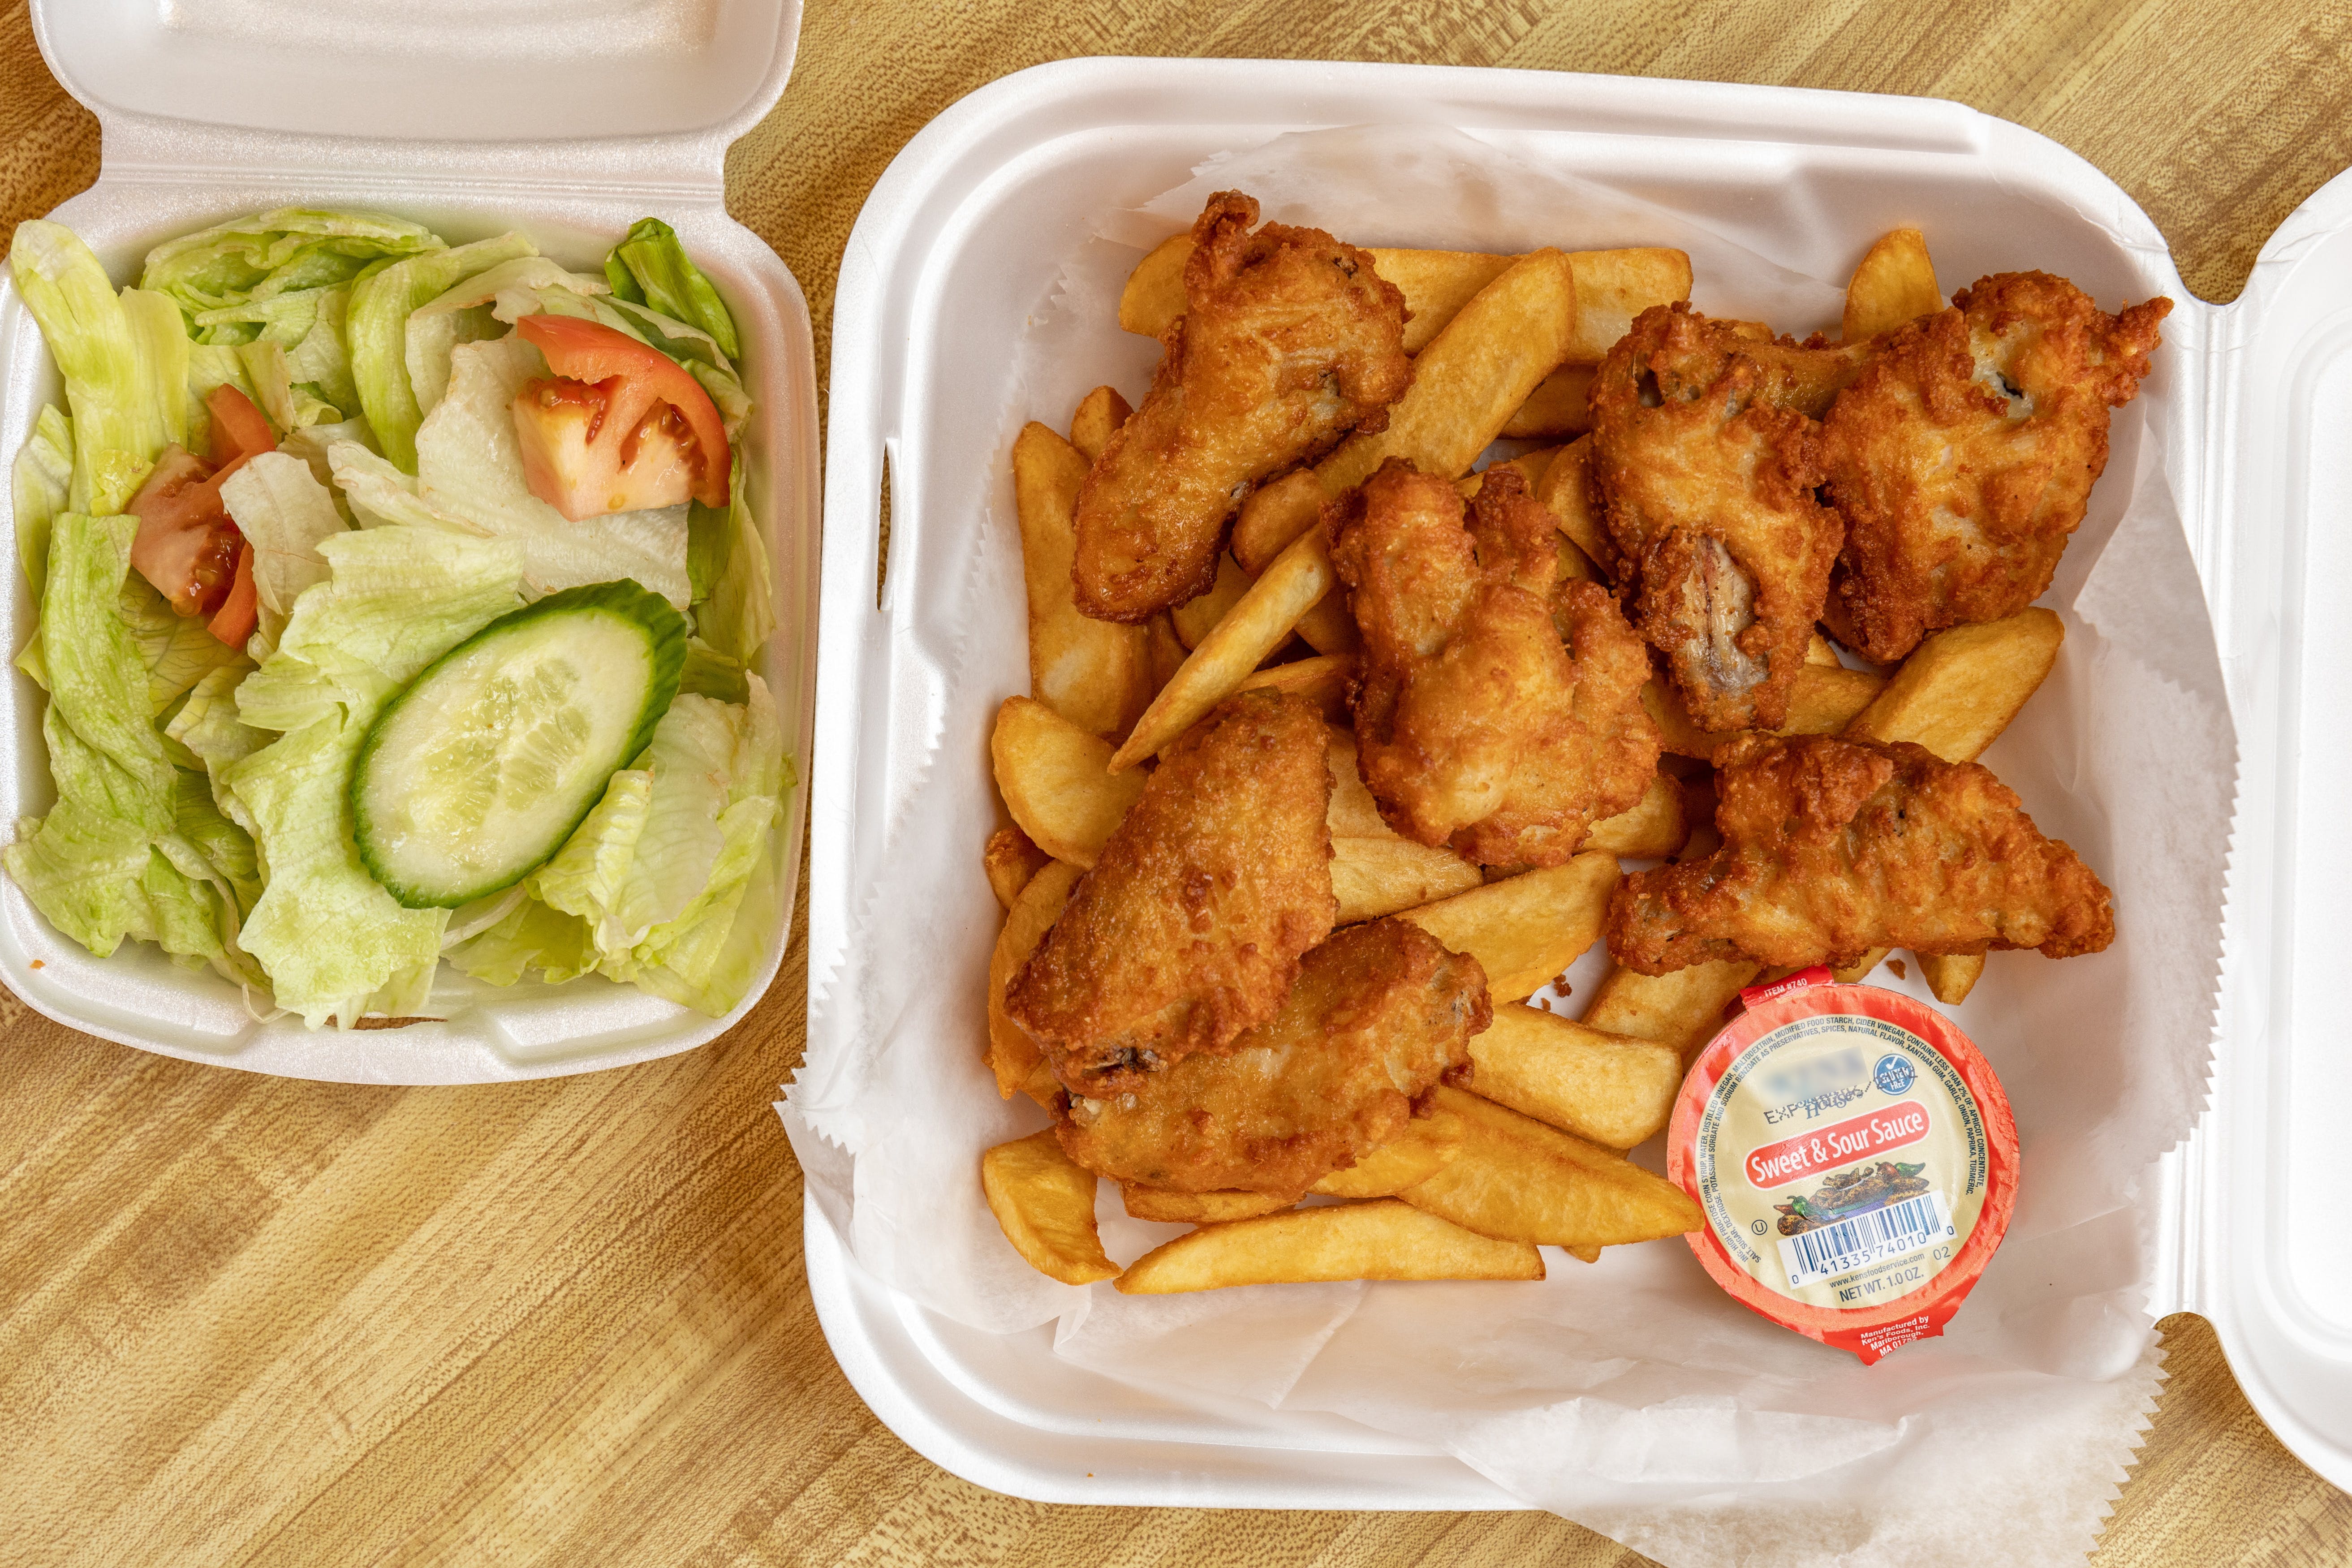 Randolph: Rock City Pizza serves chicken wings, hot subs, slices